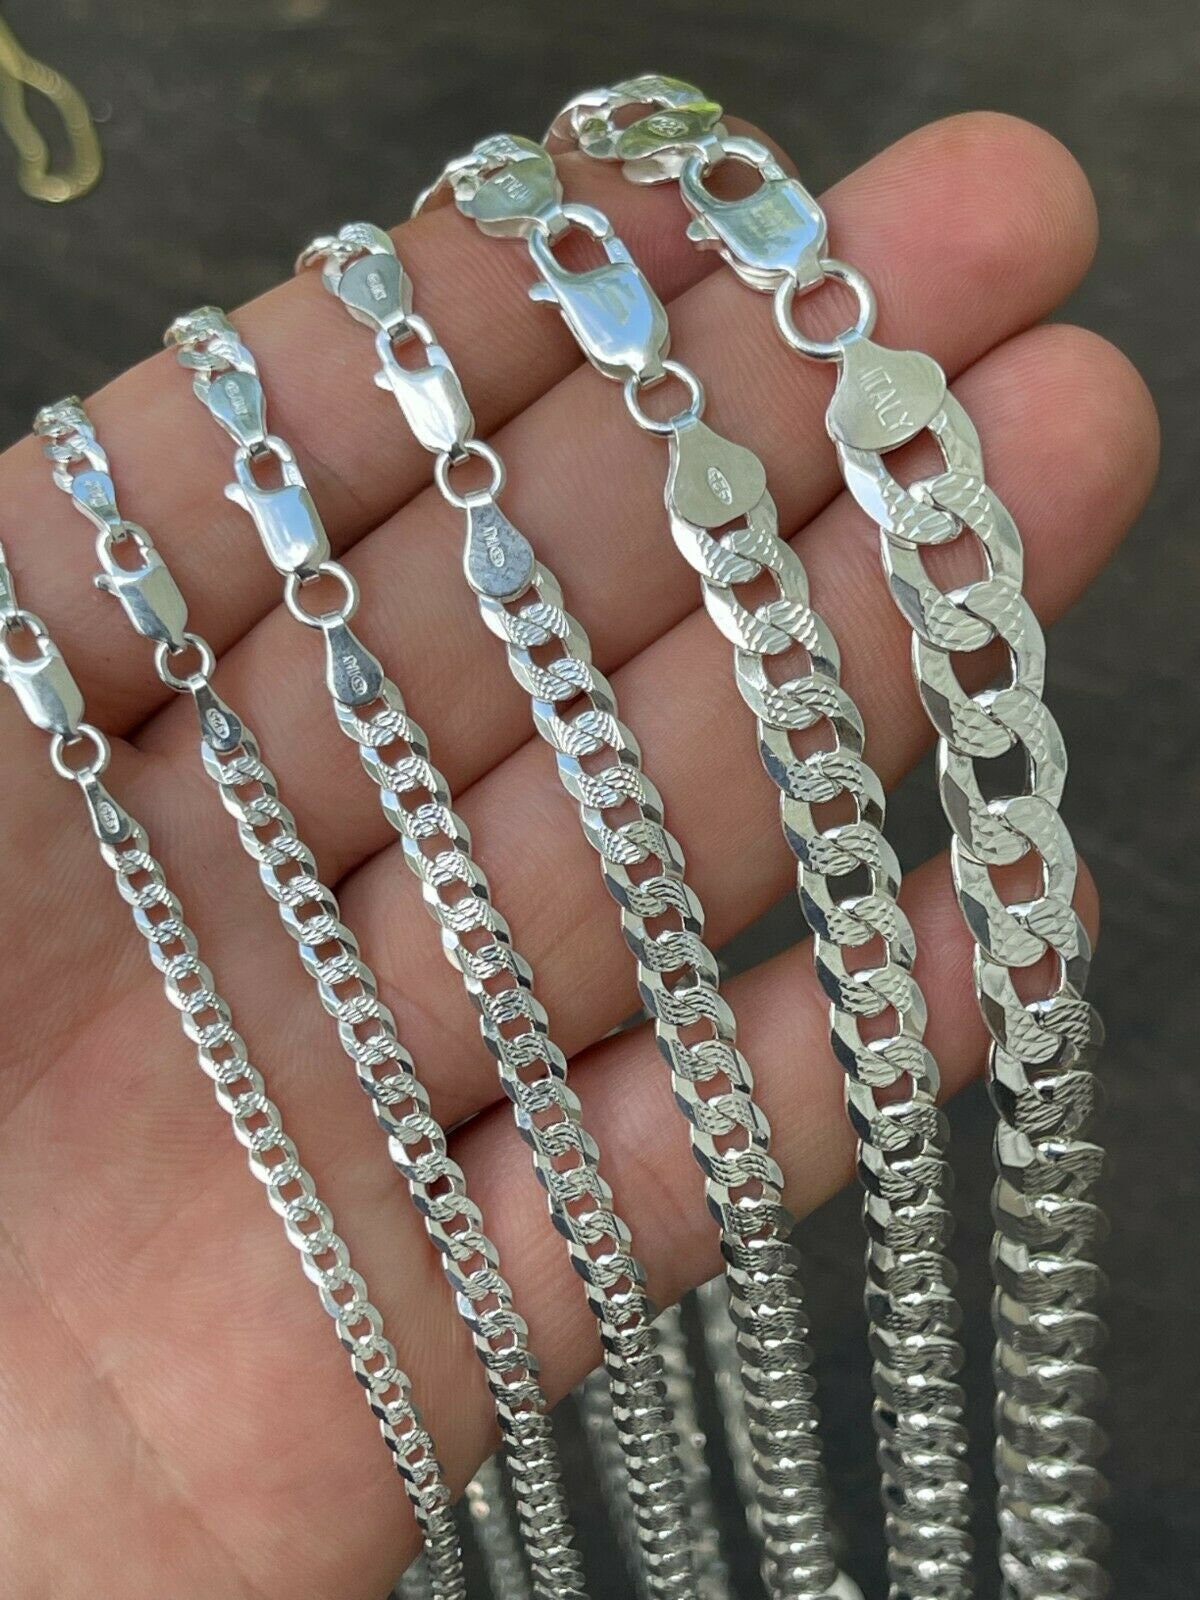 Bulk Stainless Steel Chain - 3mm Cable - Choose Your Length - 1 Meter + -  CH032 Choose Your Length: 5m